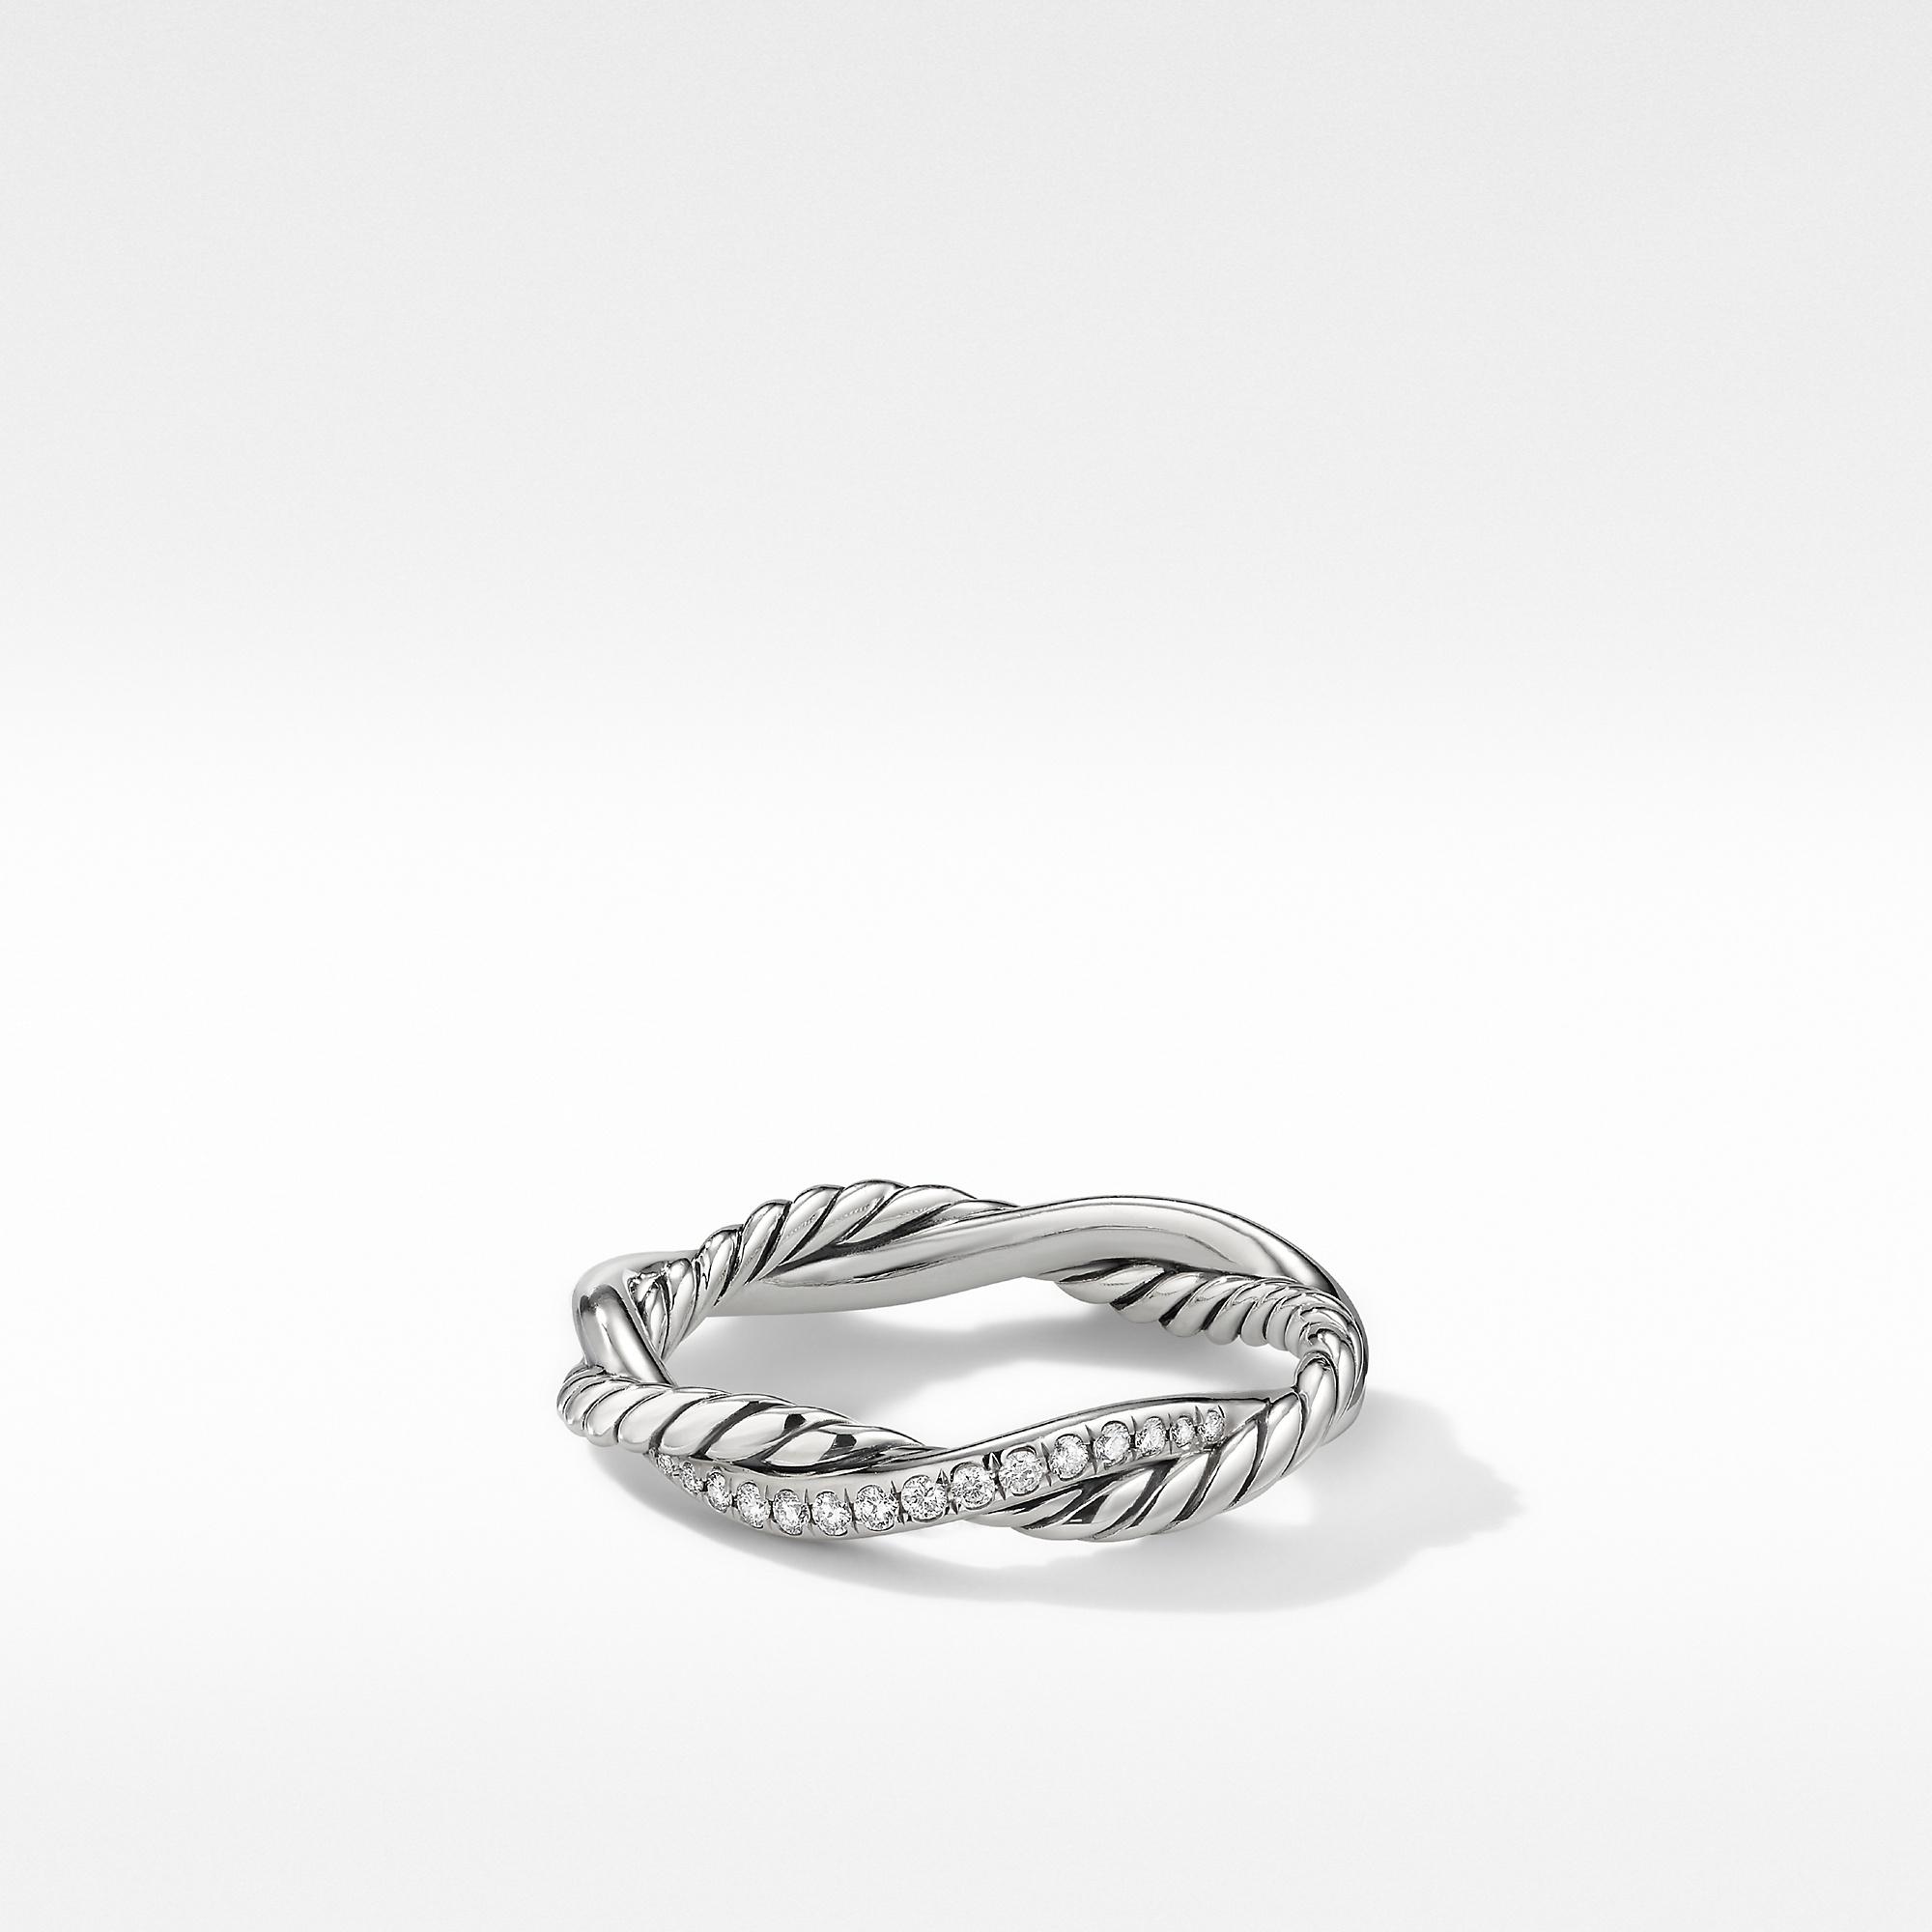 David Yurman Petite Infinity Twisted Ring in Sterling Silver, size 7